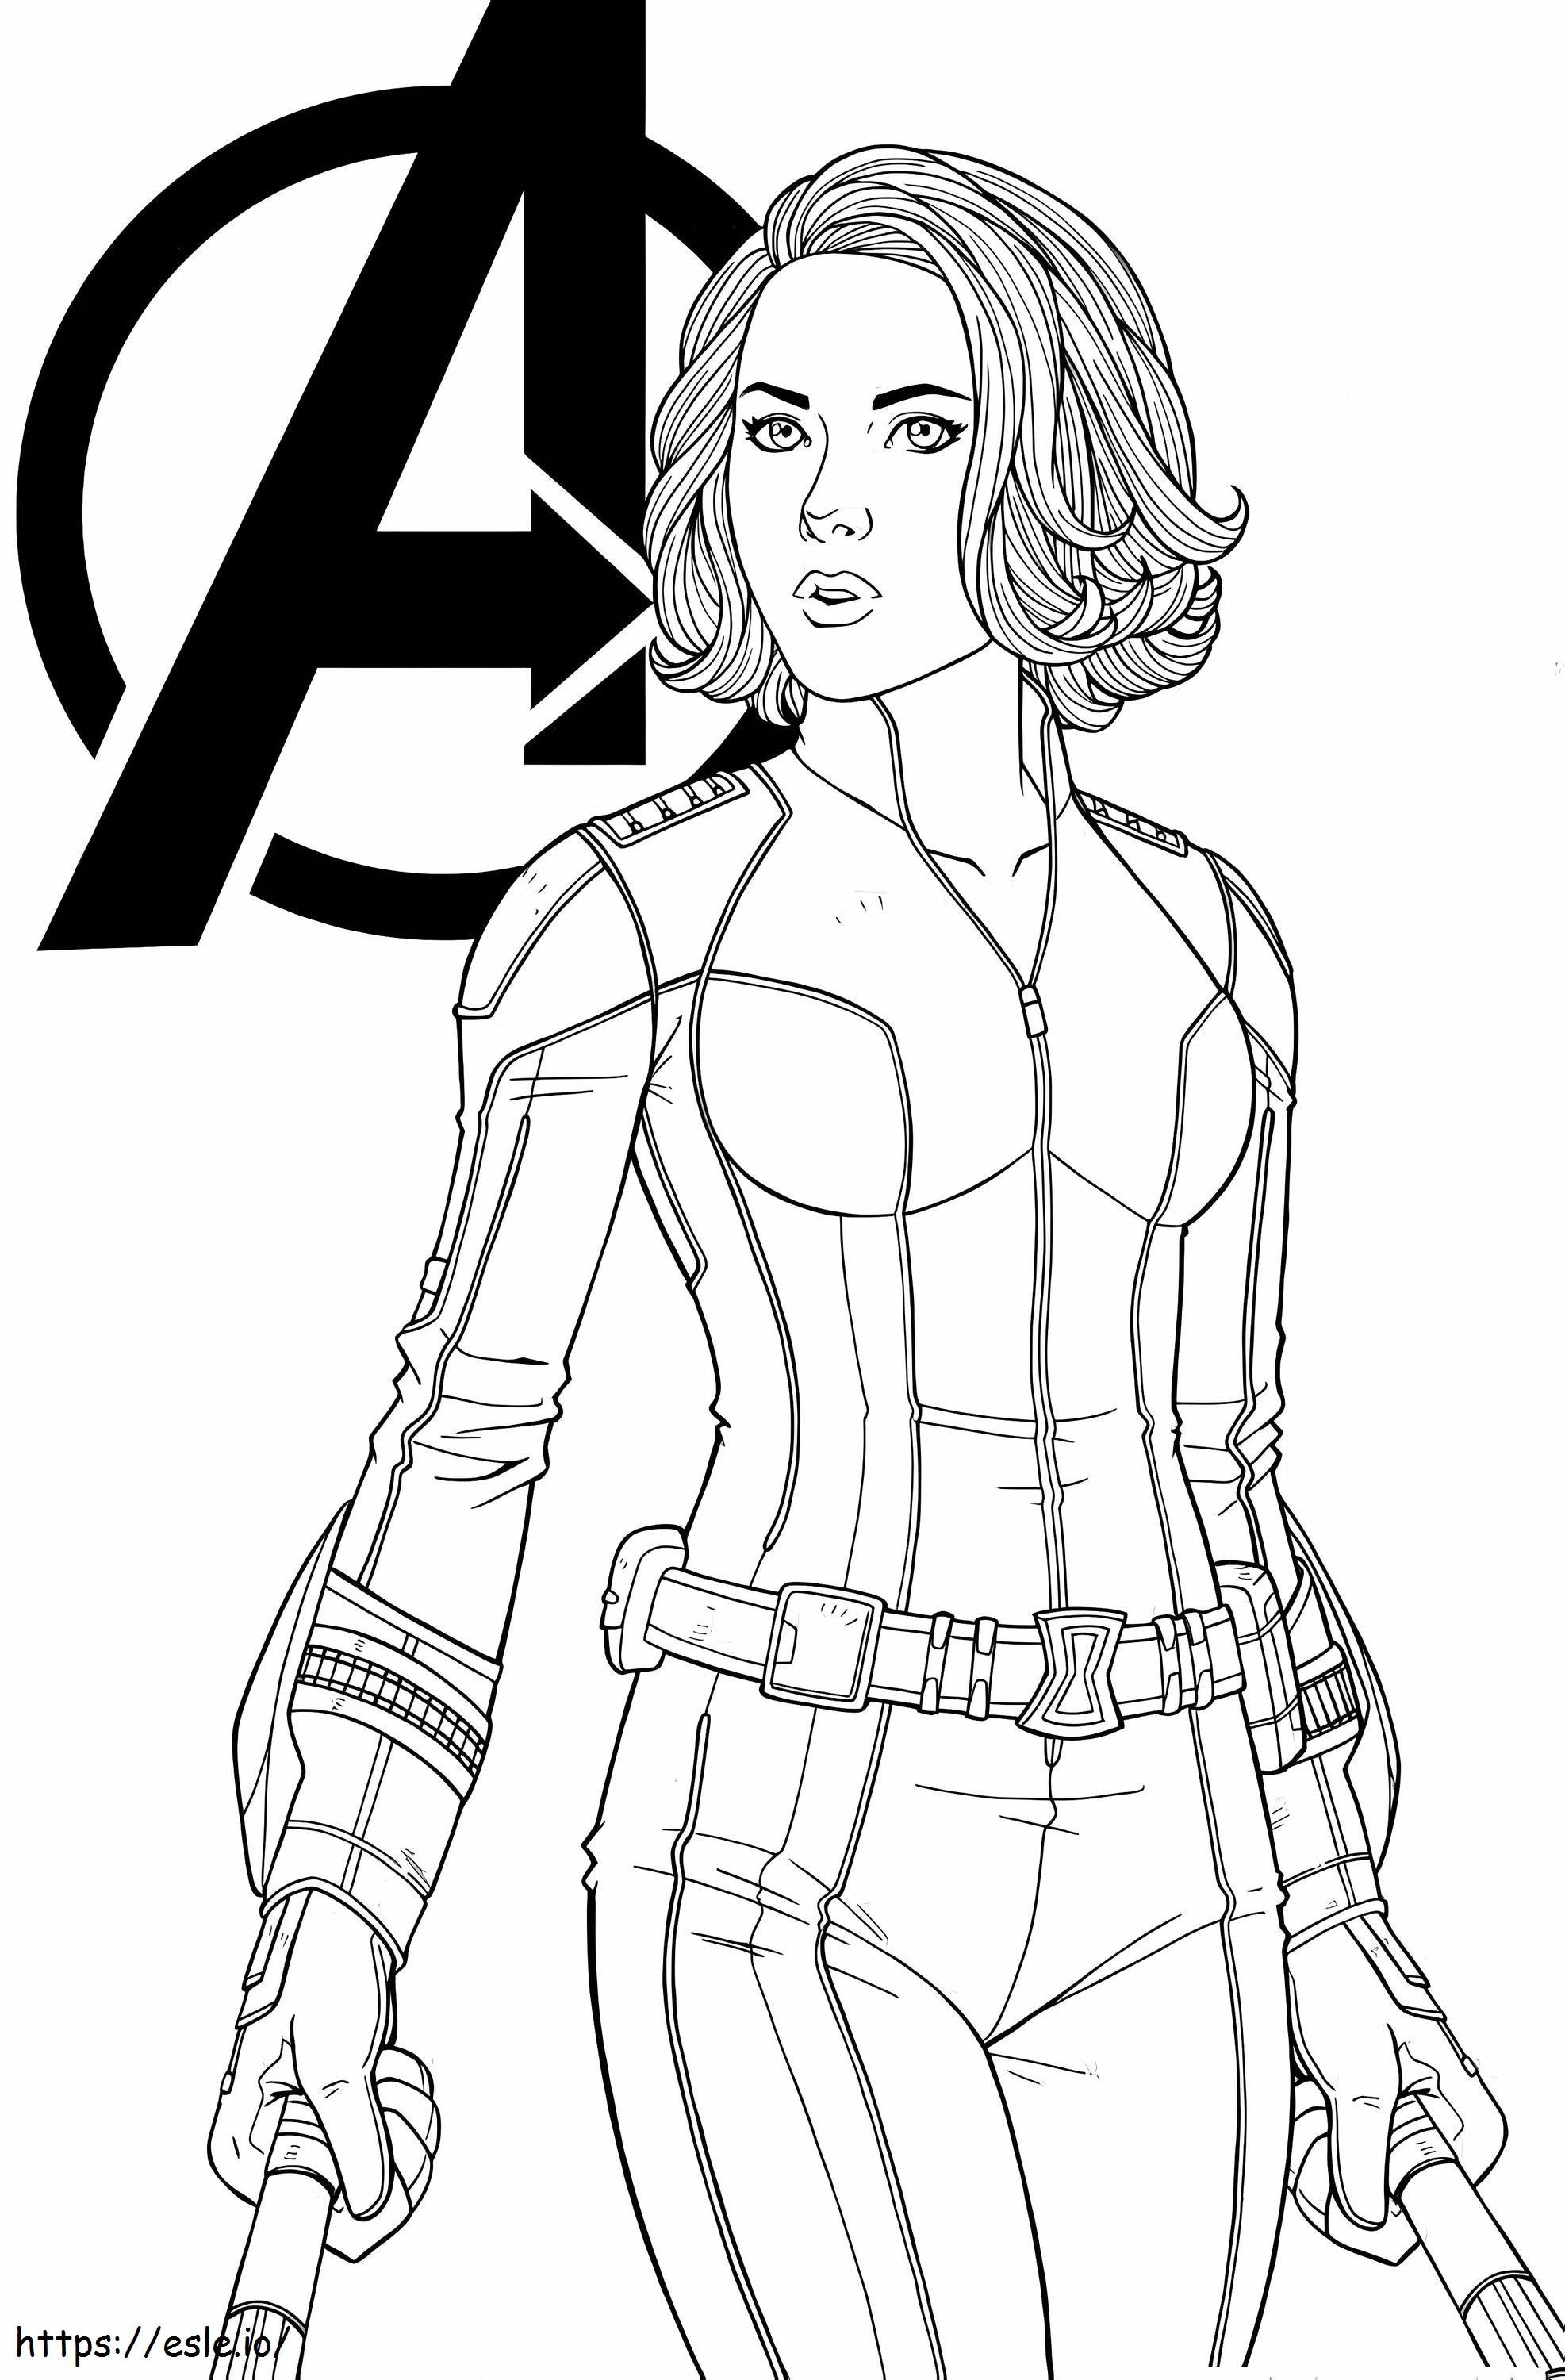 Black Widow Avenger coloring page